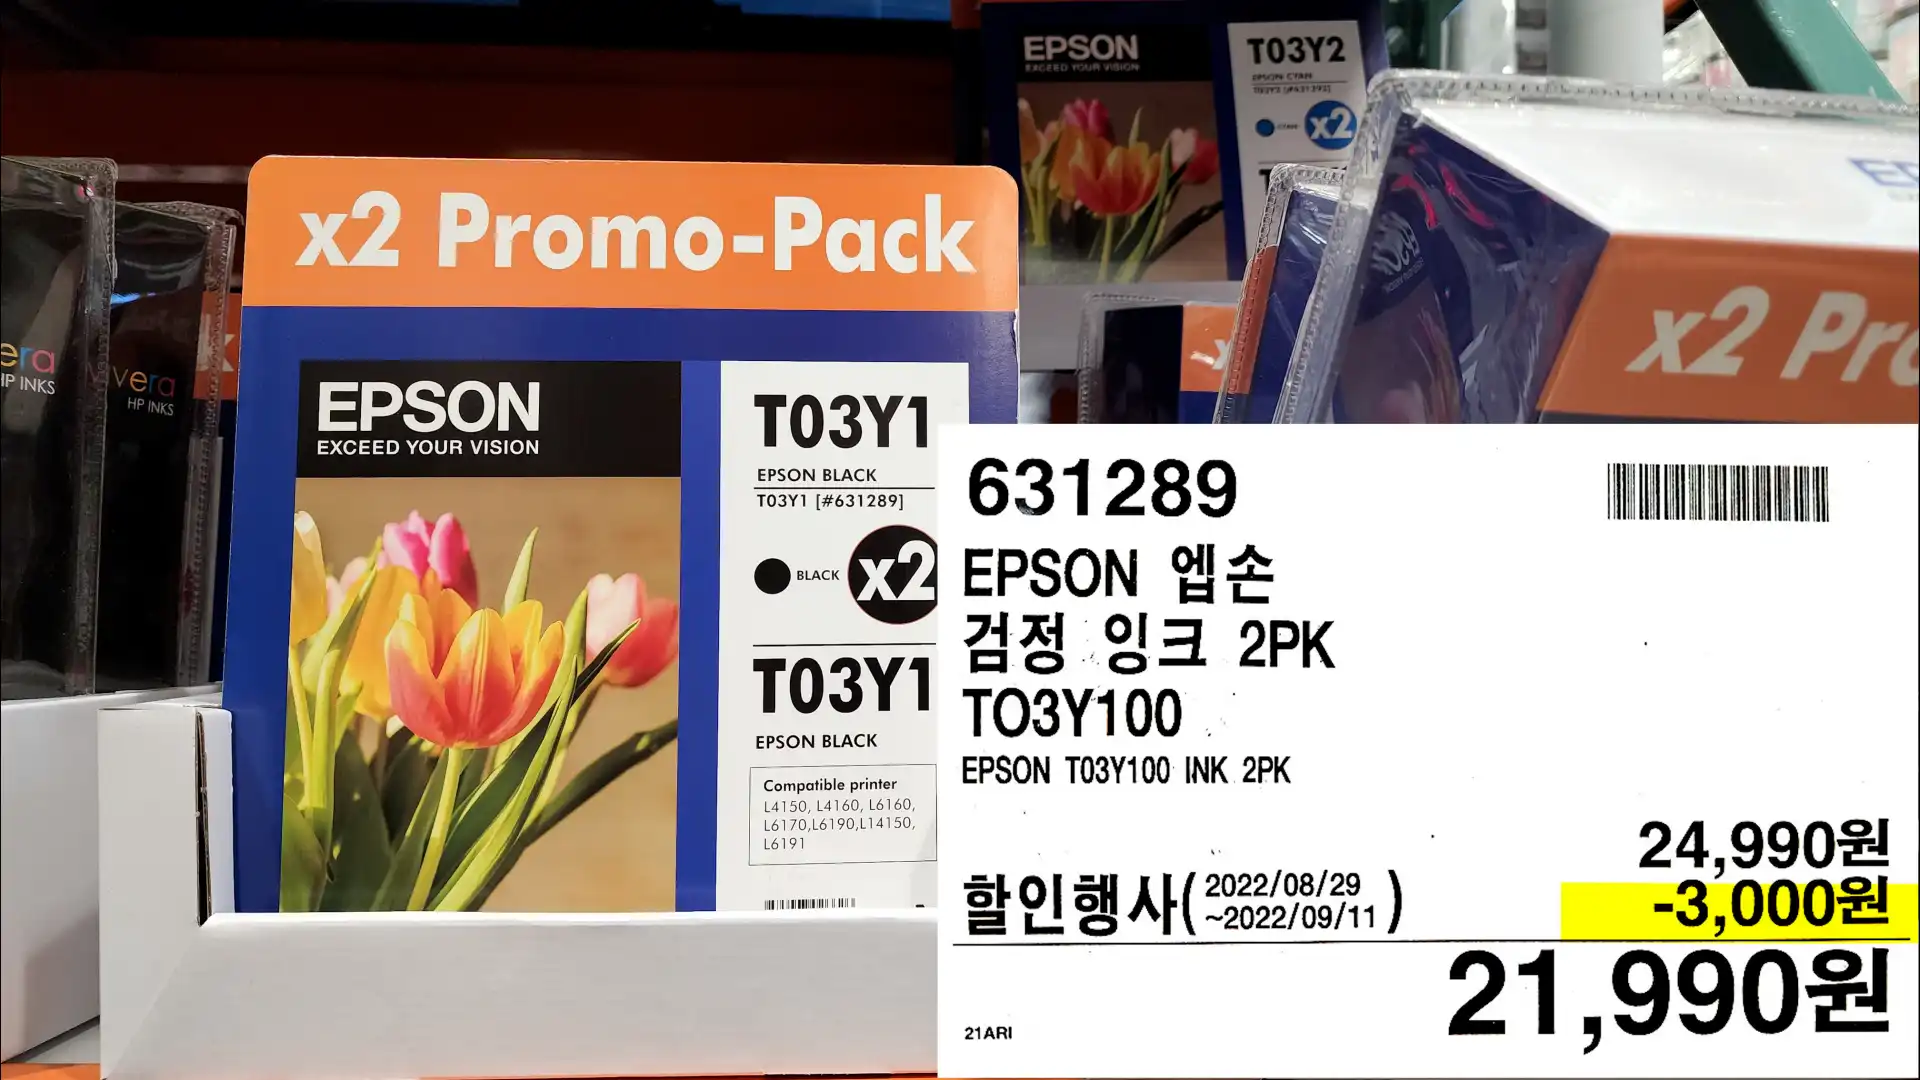 EPSON 엡손
검정 잉크 2PK
TO3Y100
EPSON TO3Y100 INK 2PK
21,990원